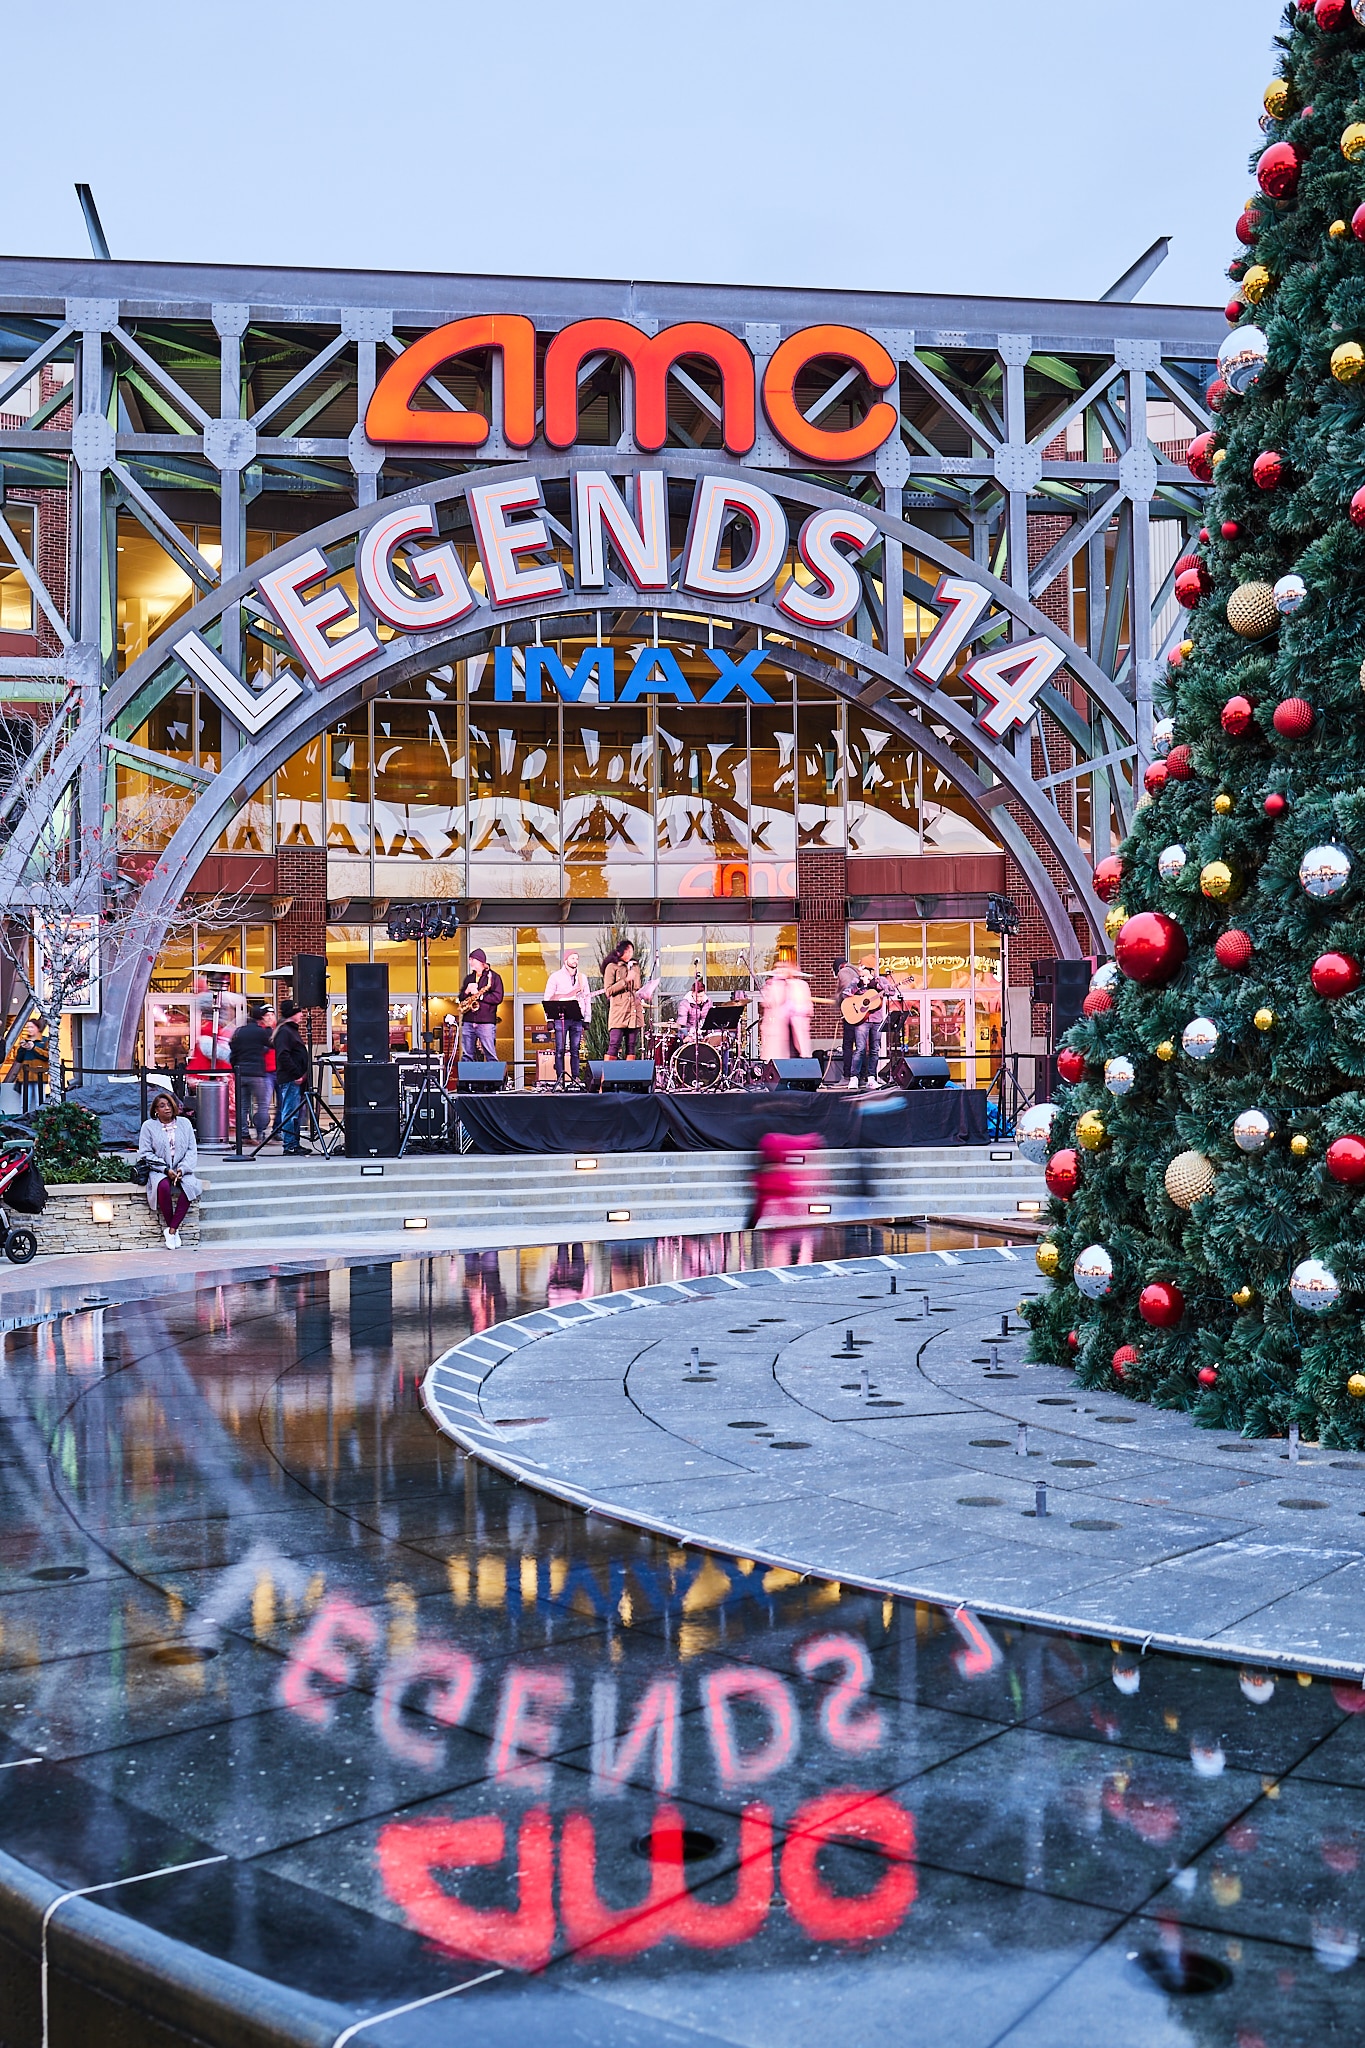 Kansas City Kansan: Legends Outlets to host free holiday classic movies